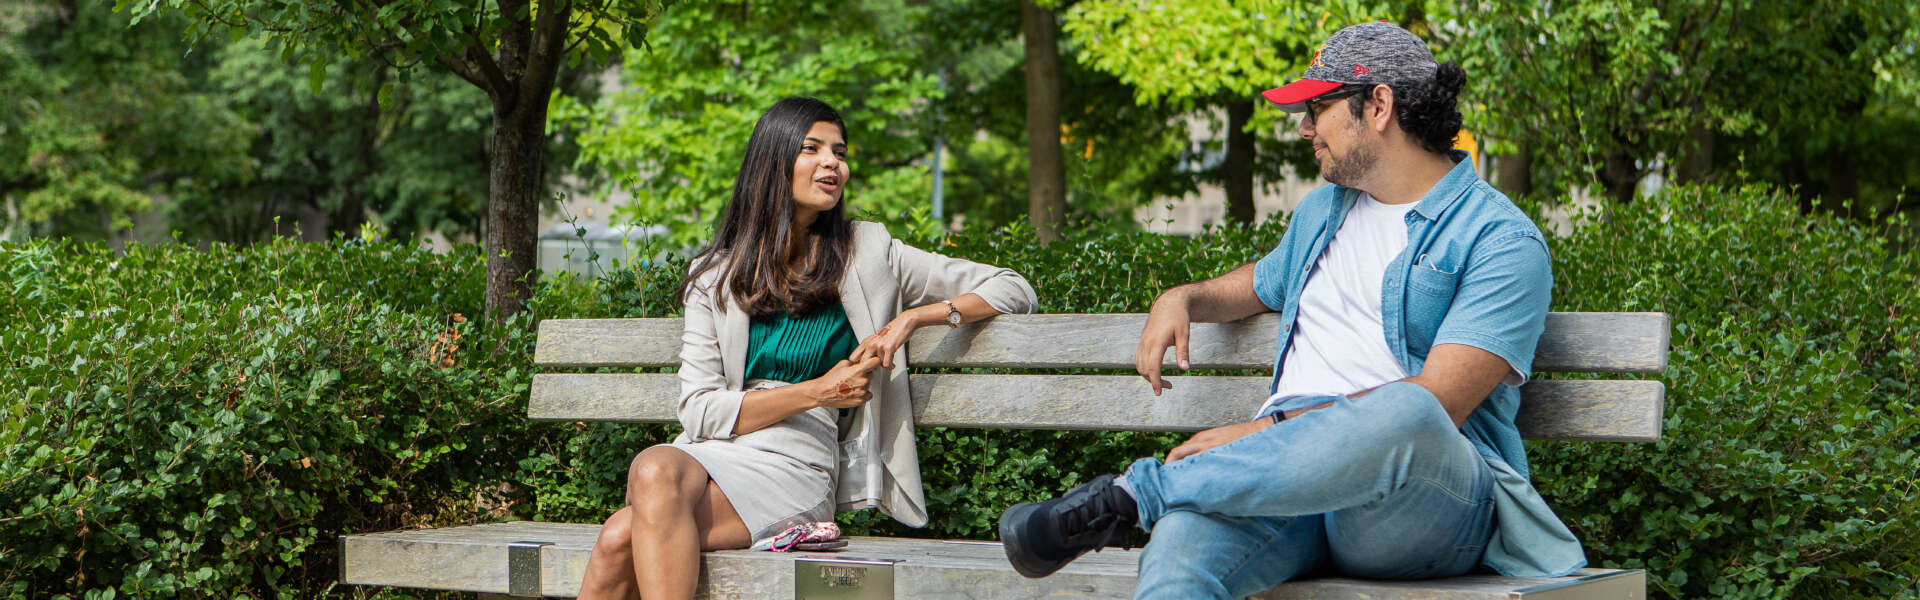 A man and a woman sitting on a park bench, talking.